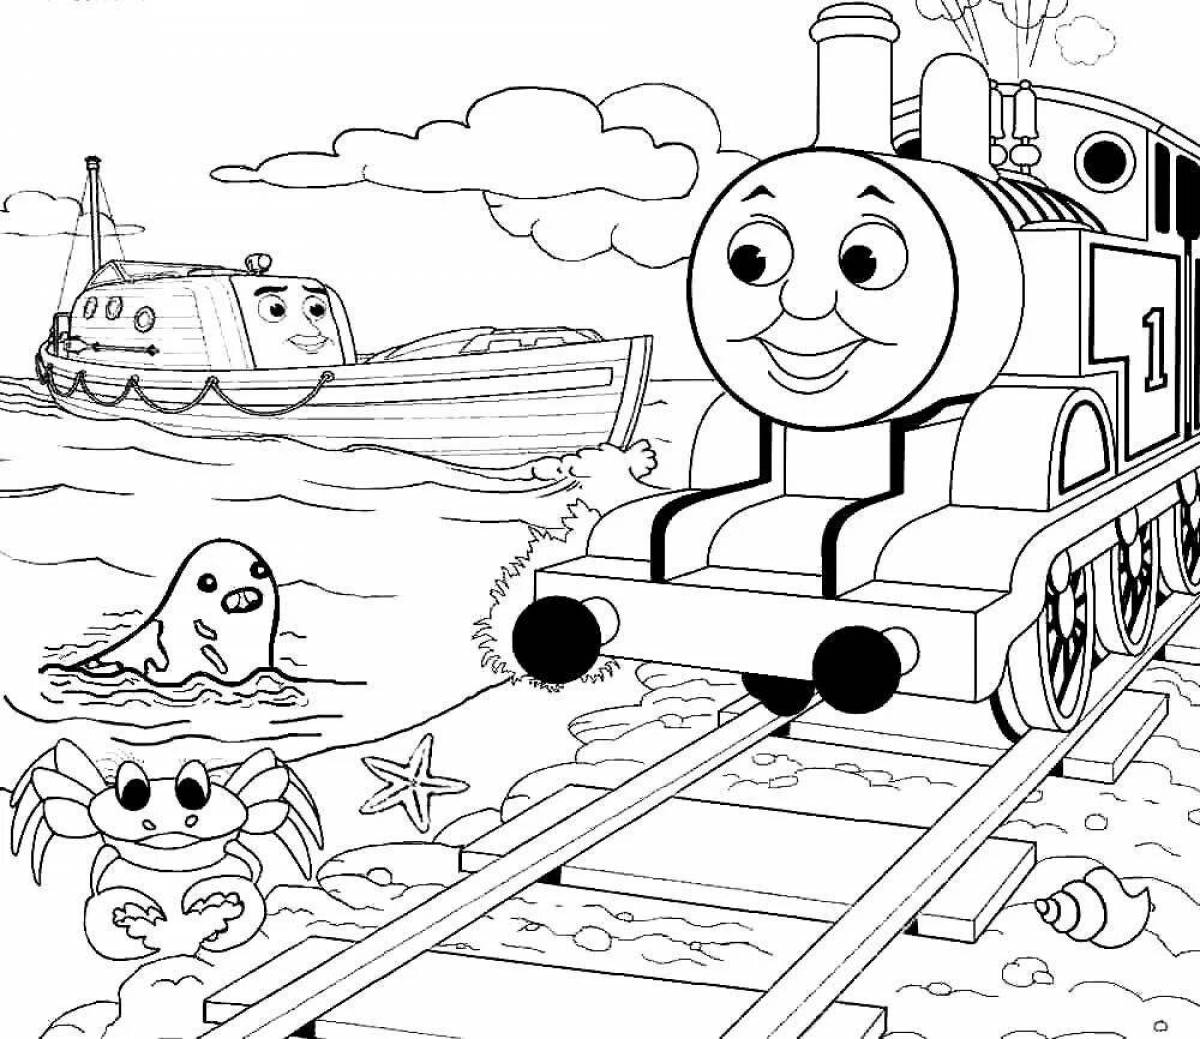 Outstanding thomas train coloring page